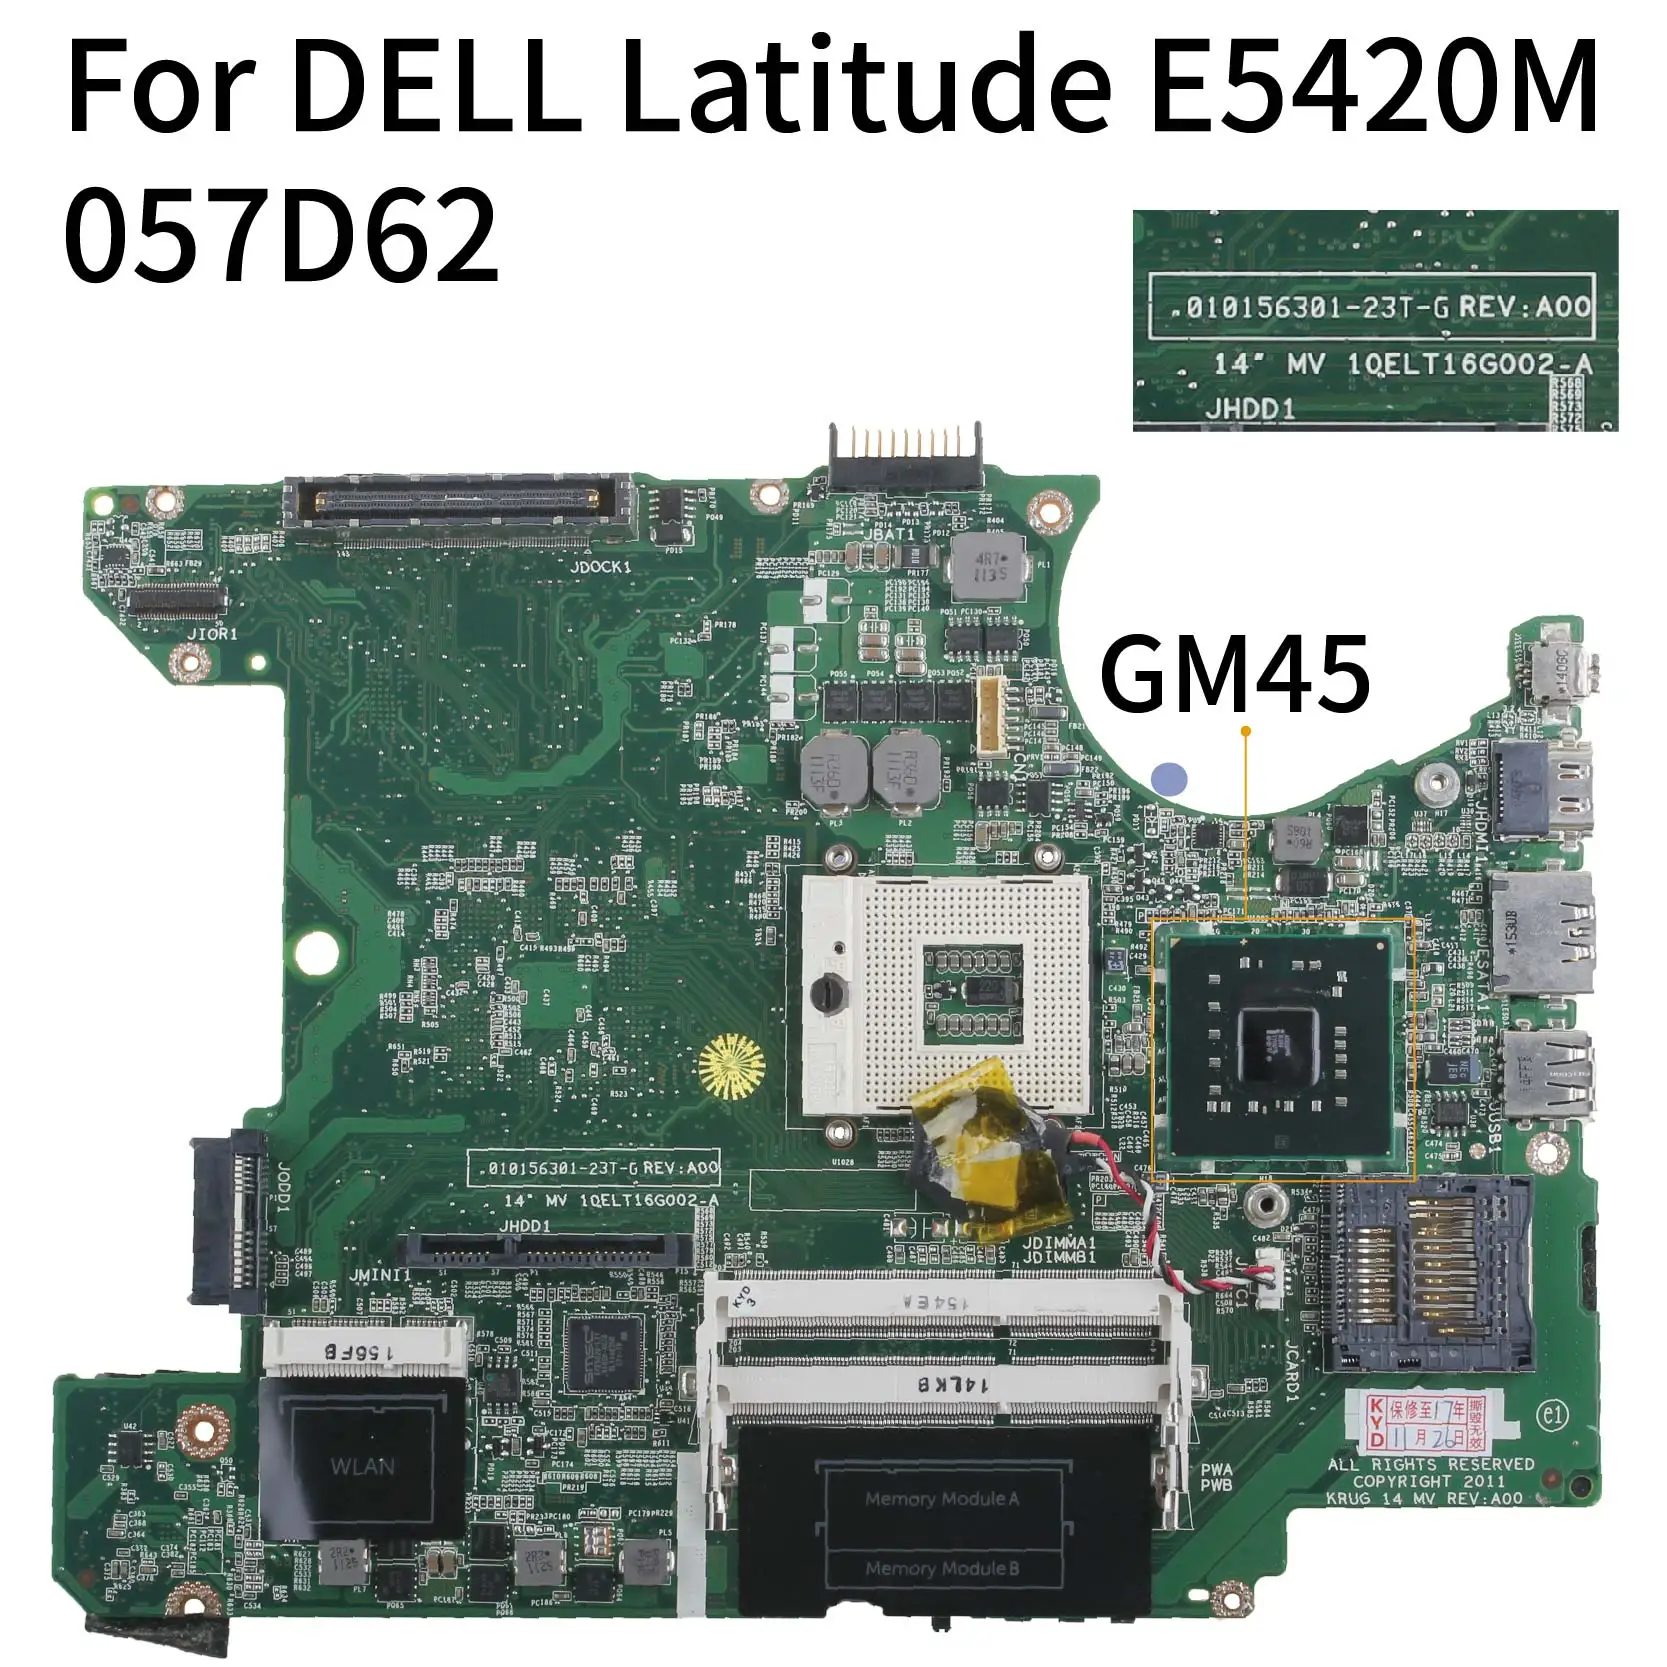 KoCoQin Laptop motherboard For DELL Latitude E5420M Mainboard CN-057D62 057D62 010156301-23T-G GM45